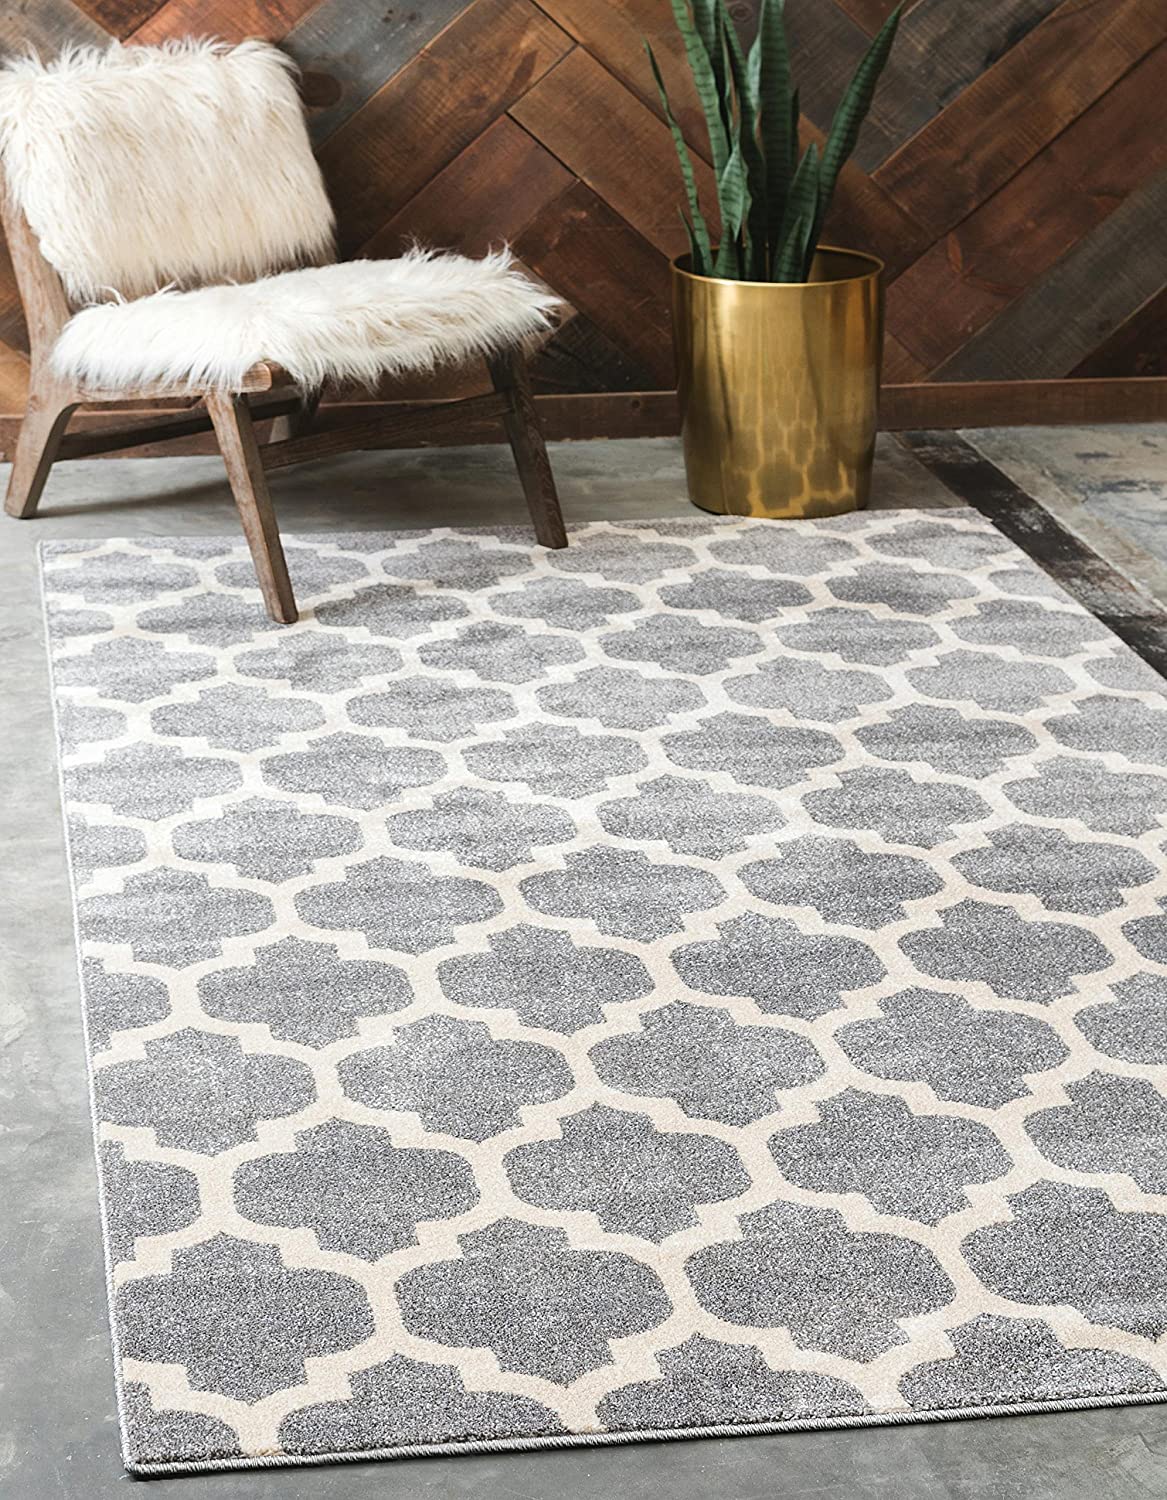  Top 10 best selling rugs you will love in 2020